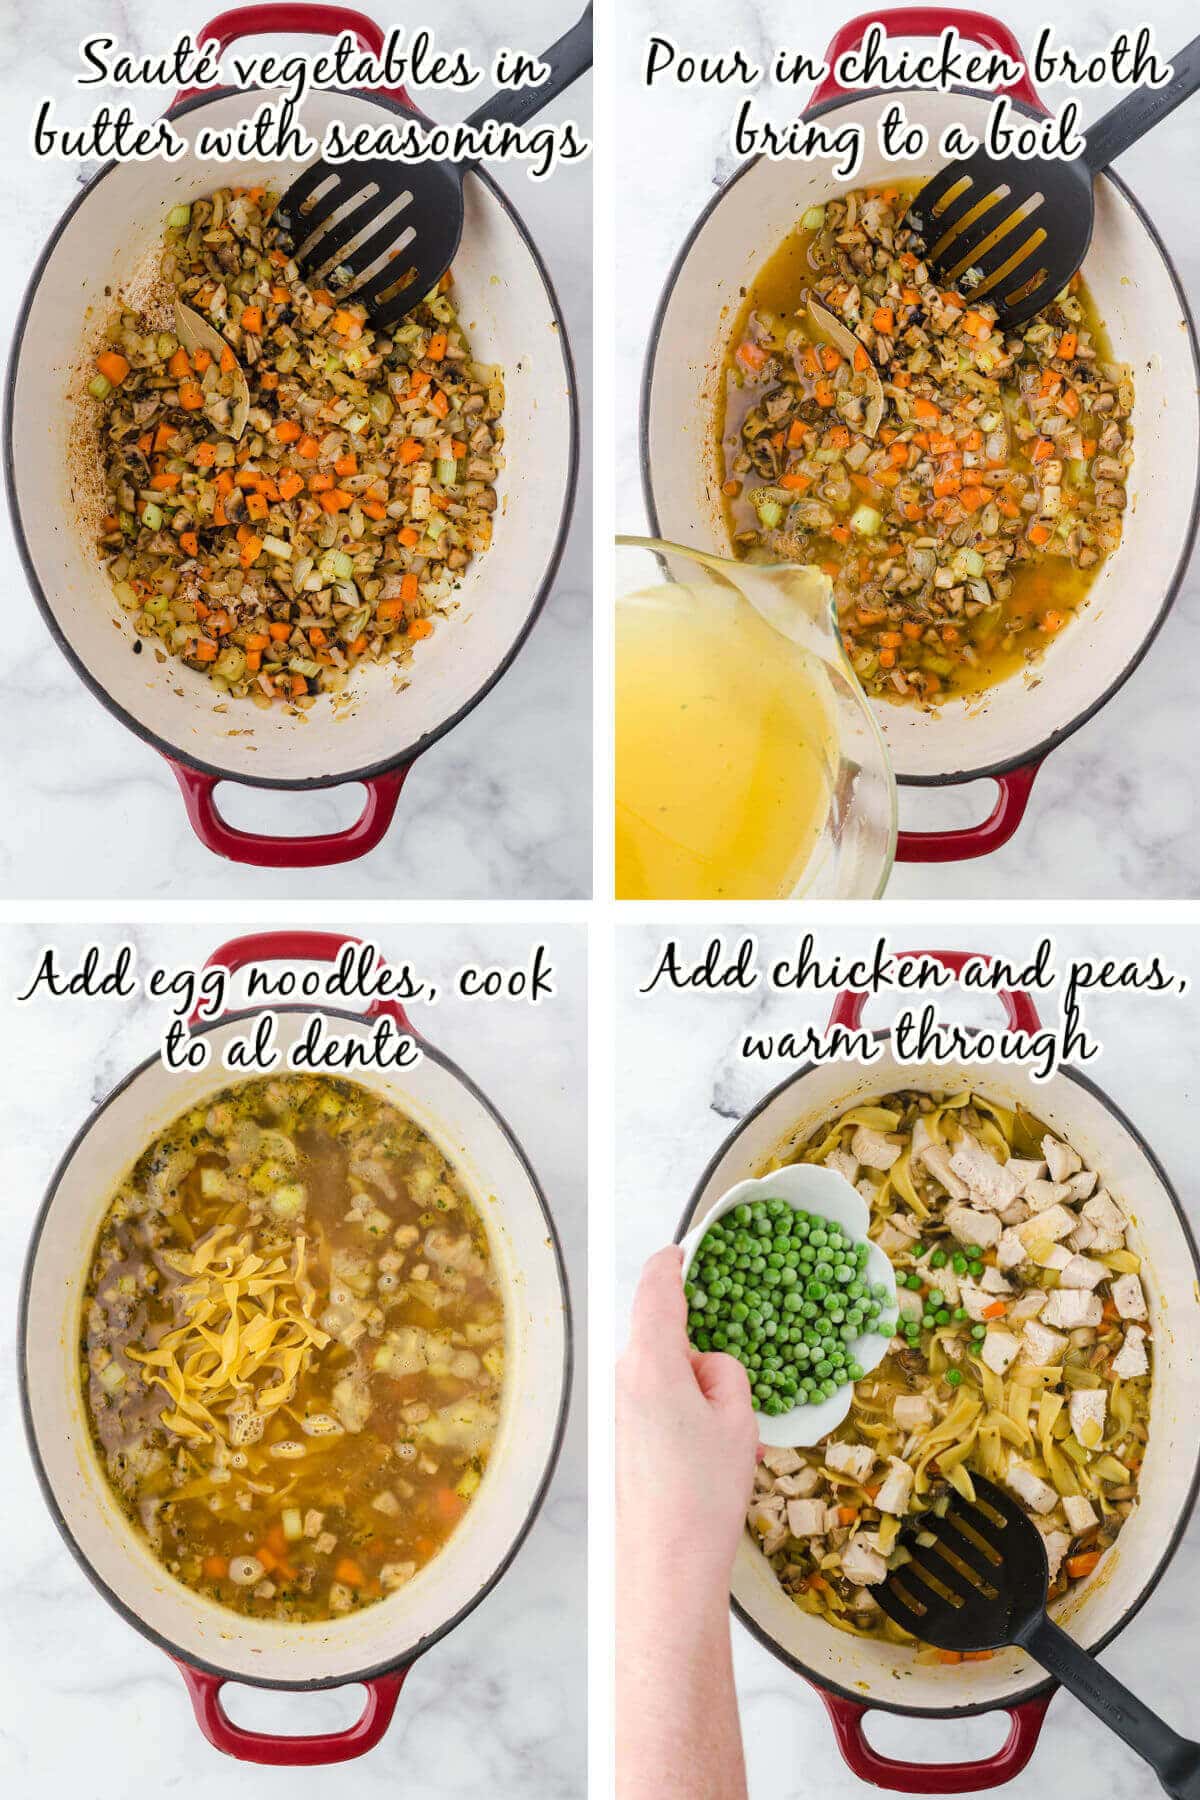 Instructions to make Chicken Noodle Soup Recipe with print overlay.